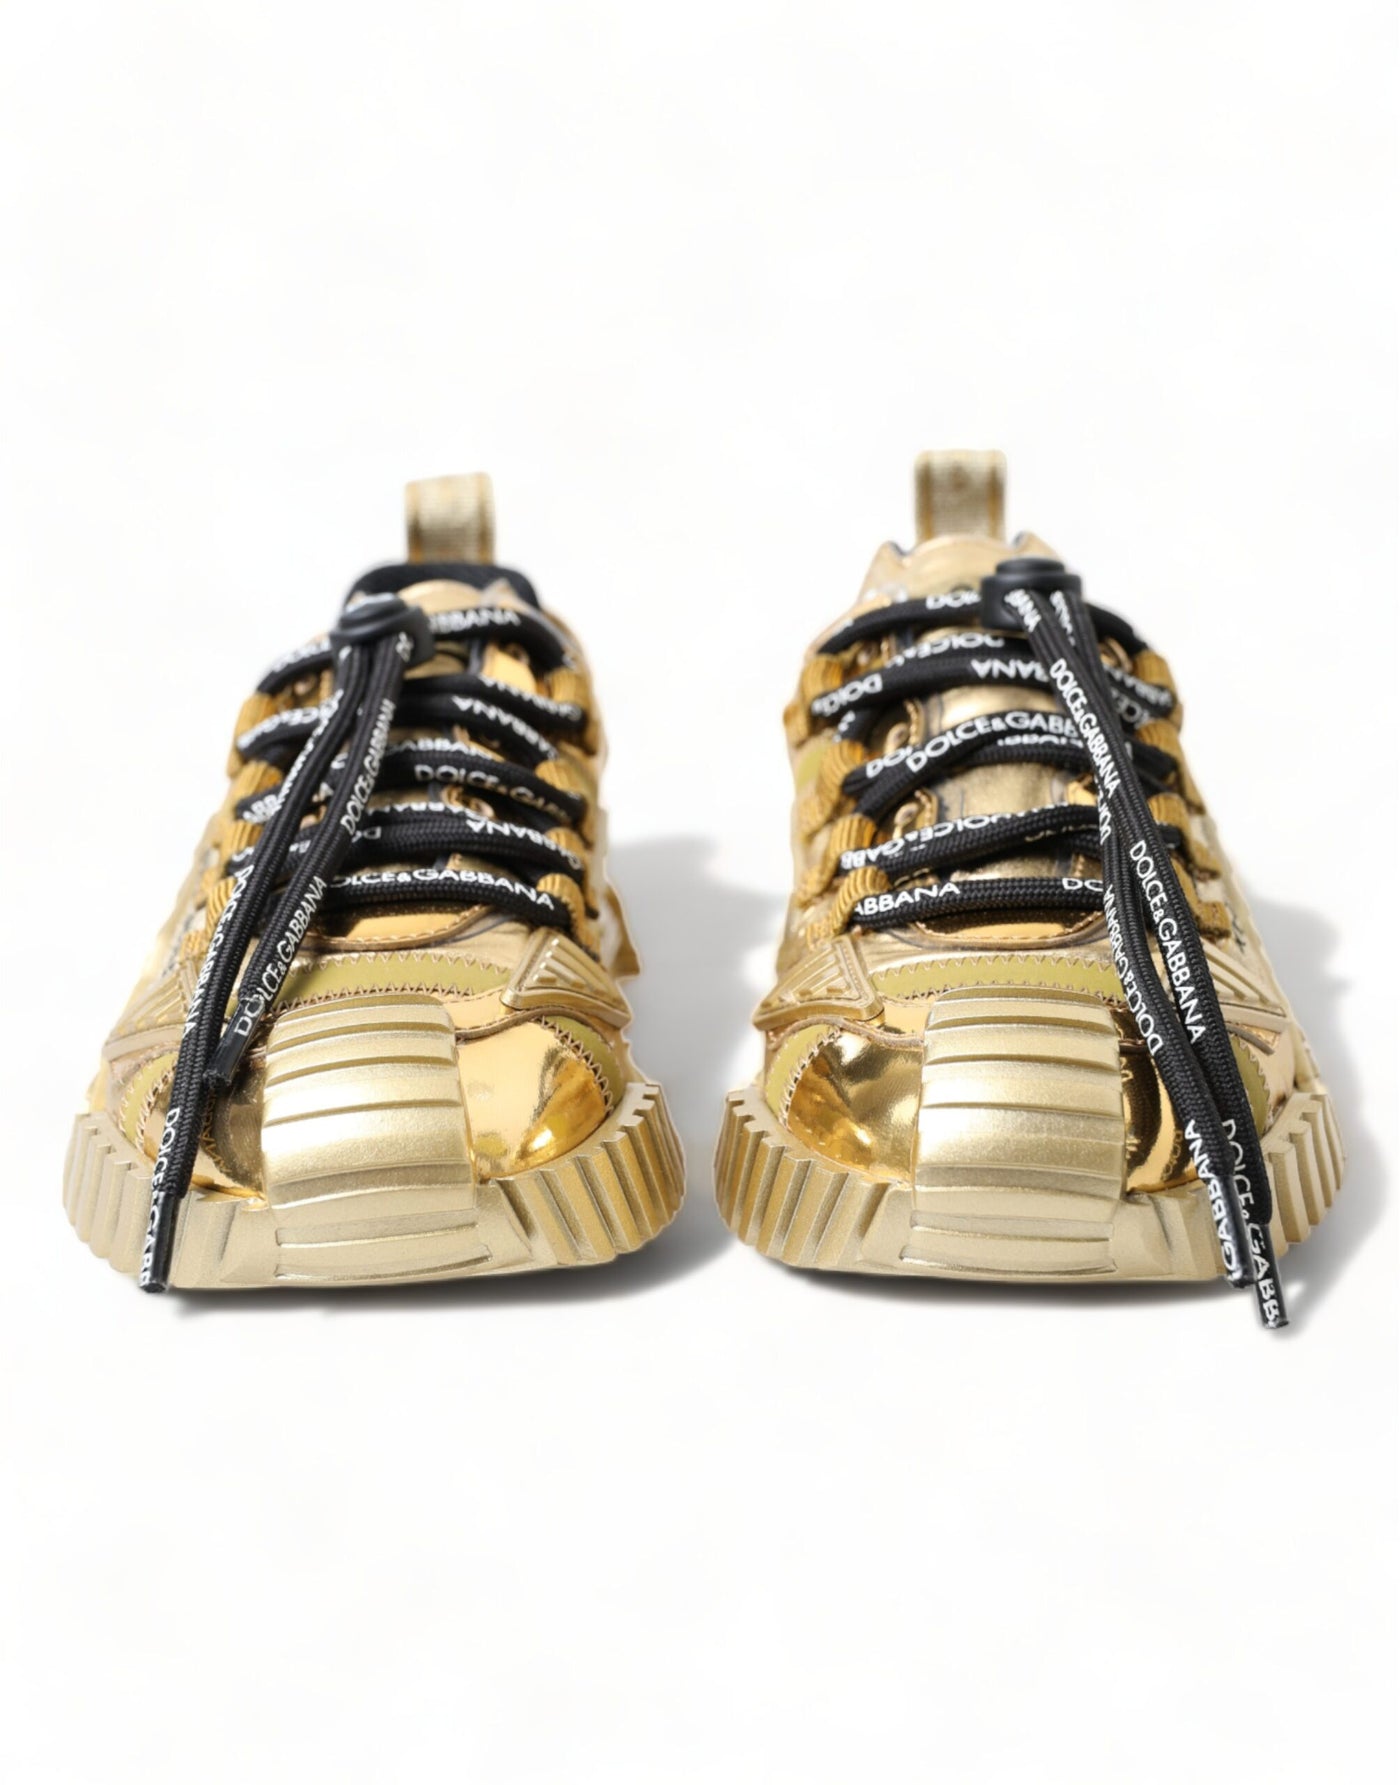 Dolce & Gabbana Metallic Gold NS1 Low Top Sneakers Shoes